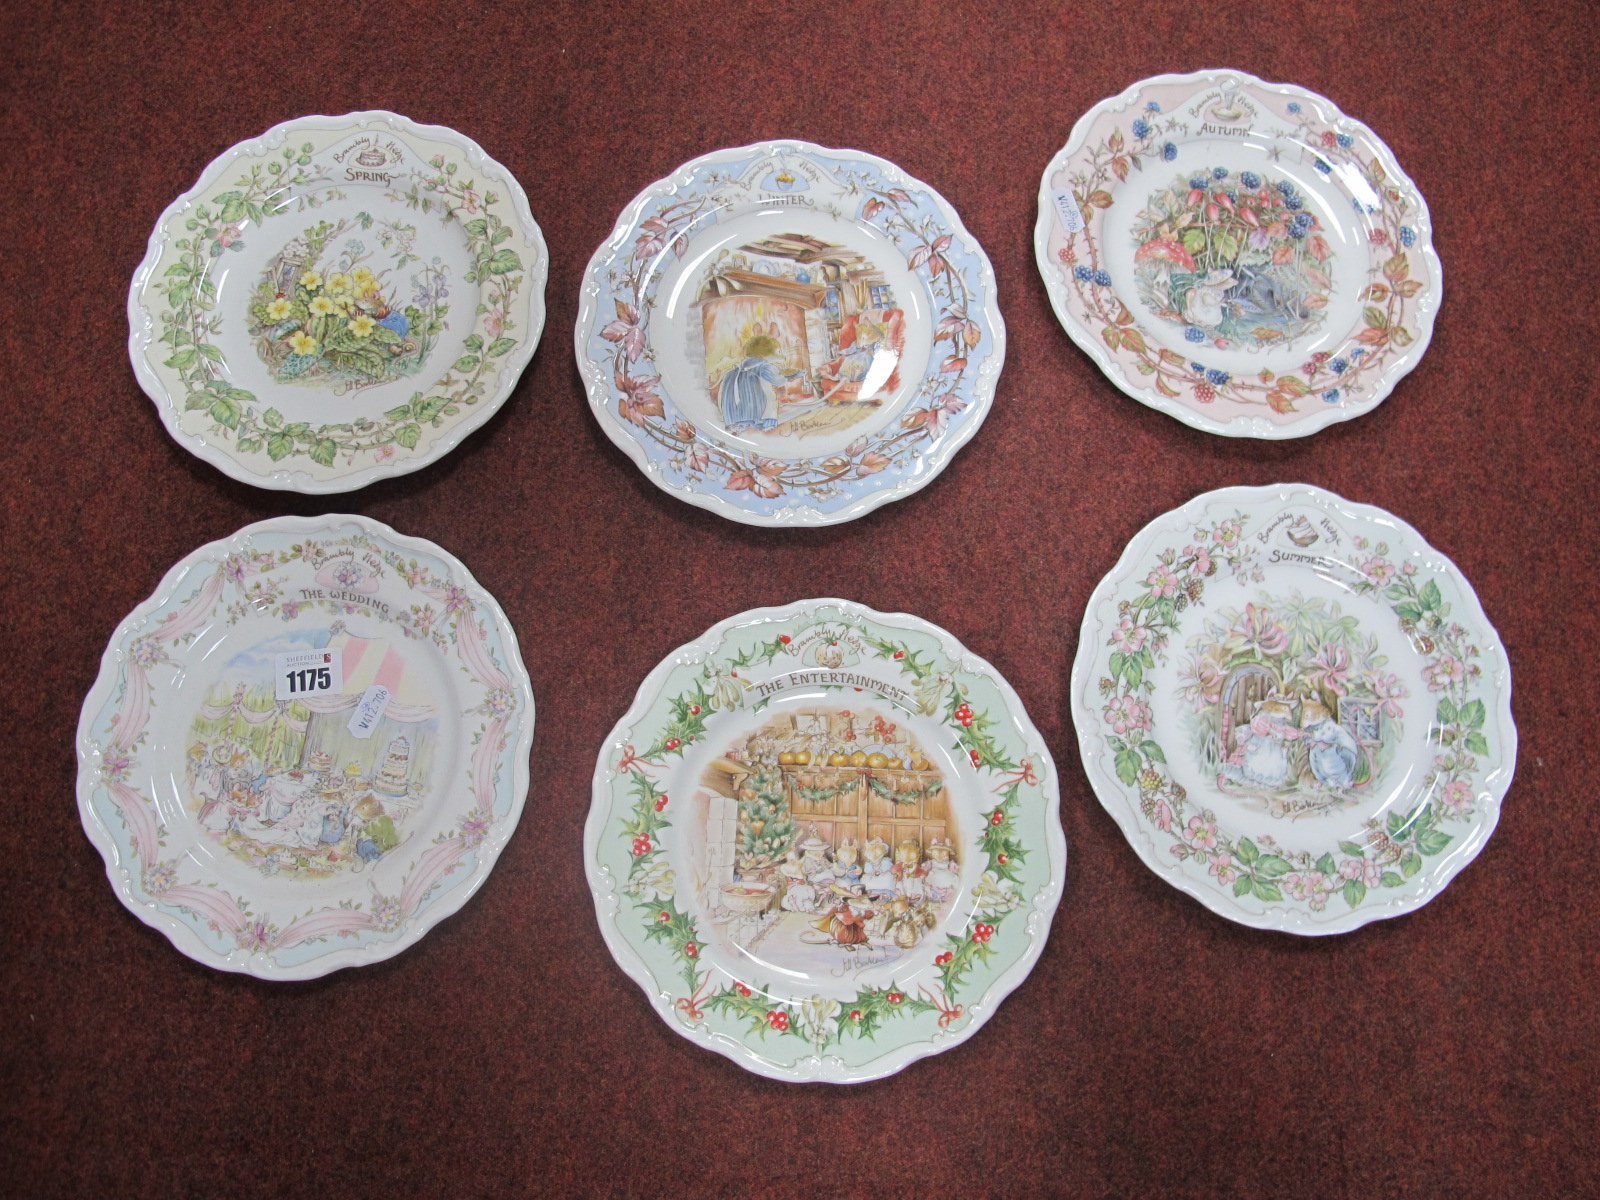 Royal Doulton Brambly Hedge, 21cm diameter plates, The Four Seasons, The Entertainment and the